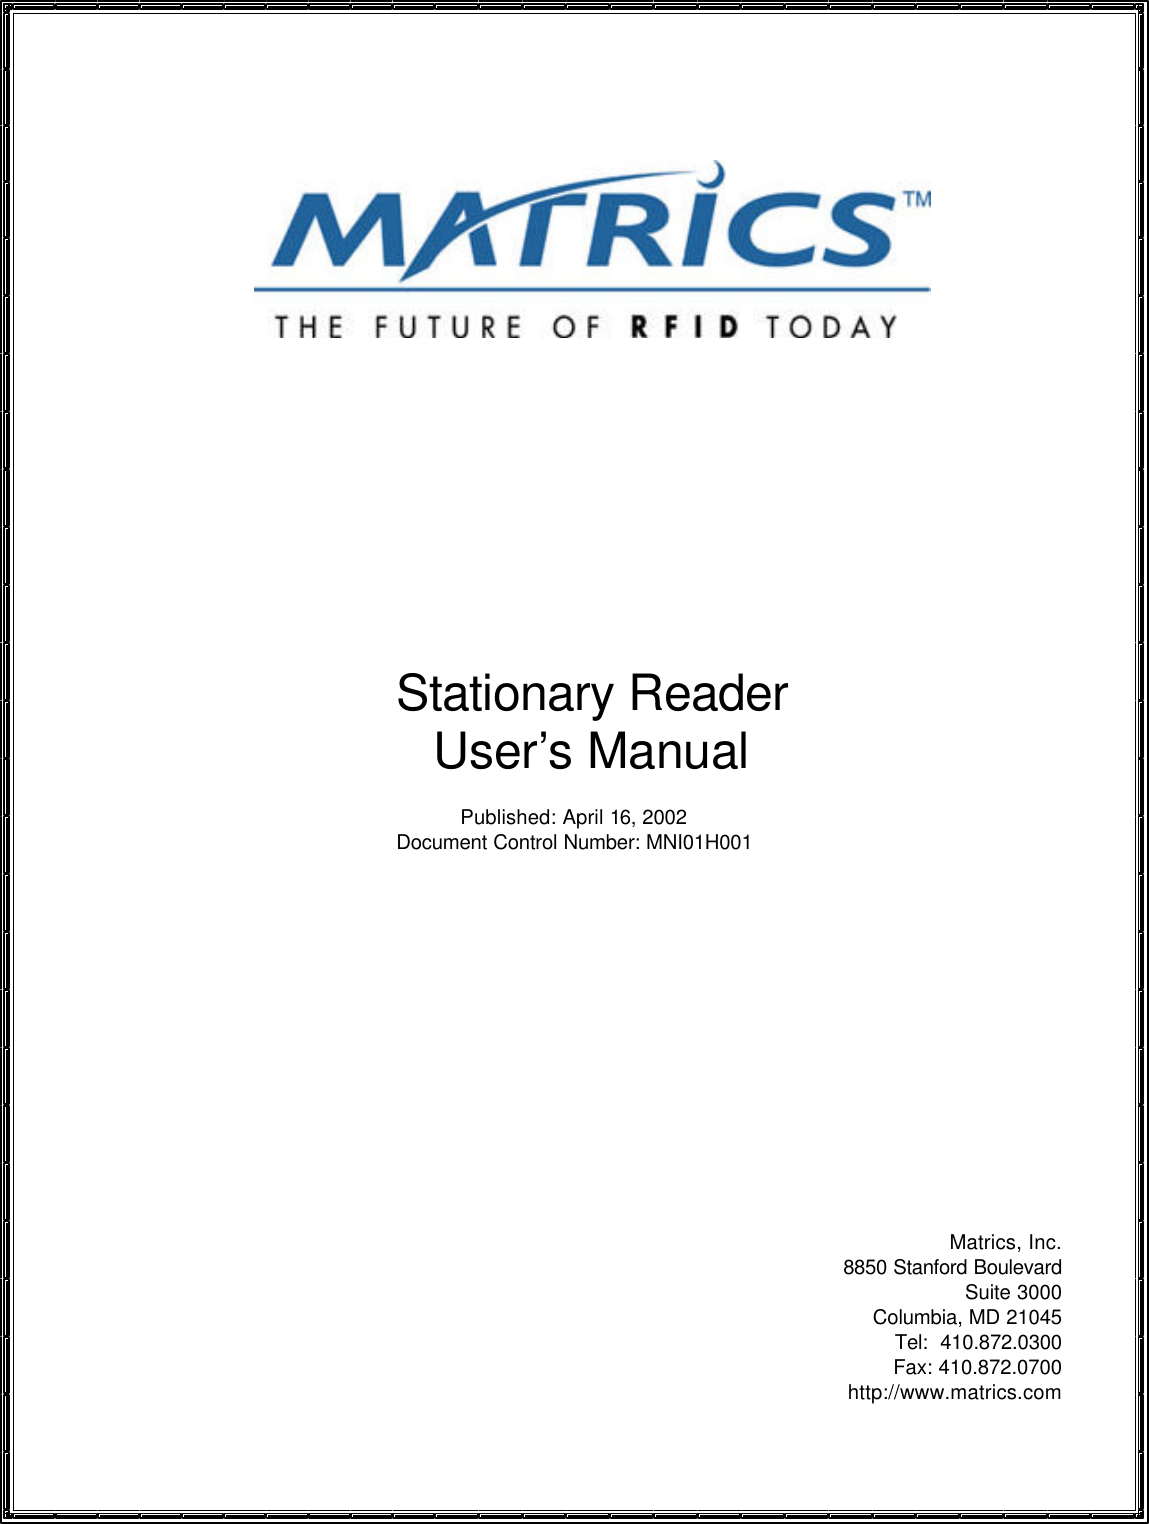              Stationary Reader User’s Manual  Published: April 16, 2002 Document Control Number: MNI01H001                Matrics, Inc. 8850 Stanford Boulevard Suite 3000 Columbia, MD 21045 Tel:  410.872.0300  Fax: 410.872.0700  http://www.matrics.com 